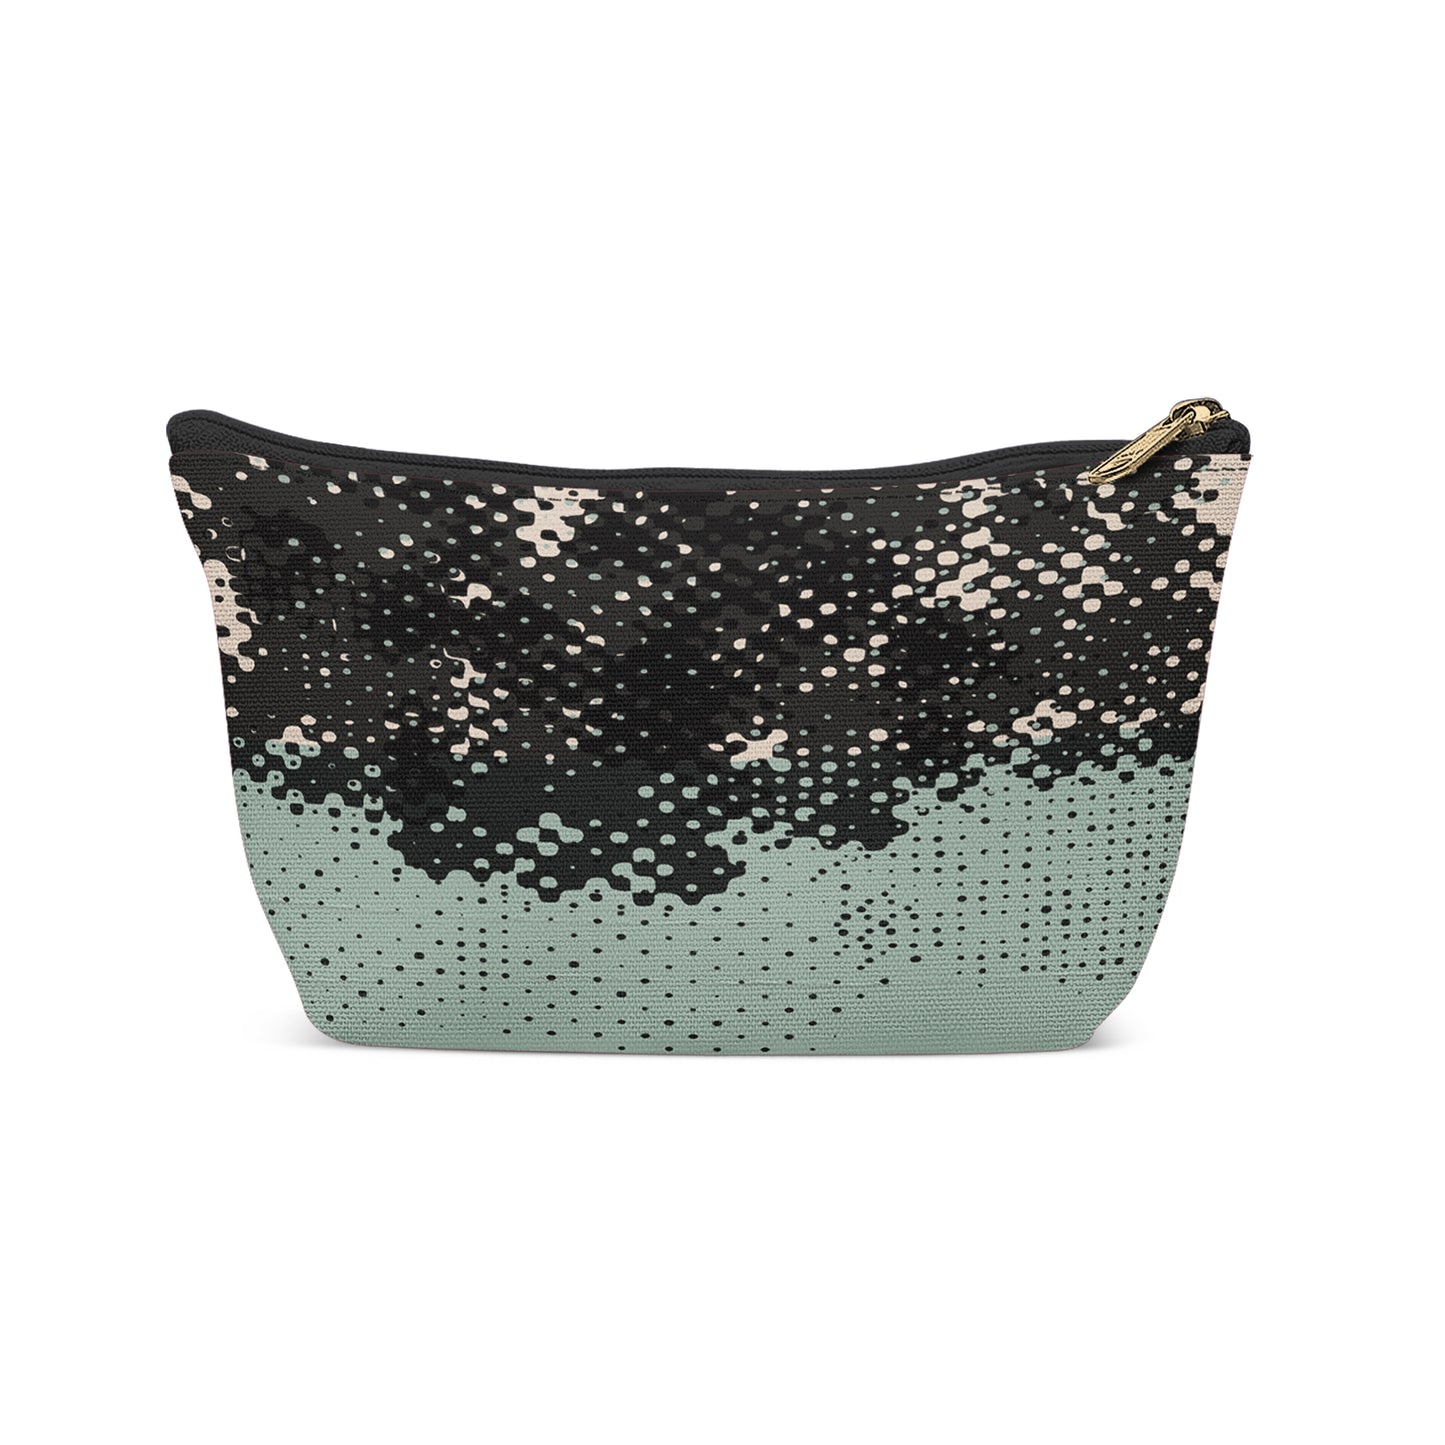 Mint with Black Abstract Art Makeup Bag